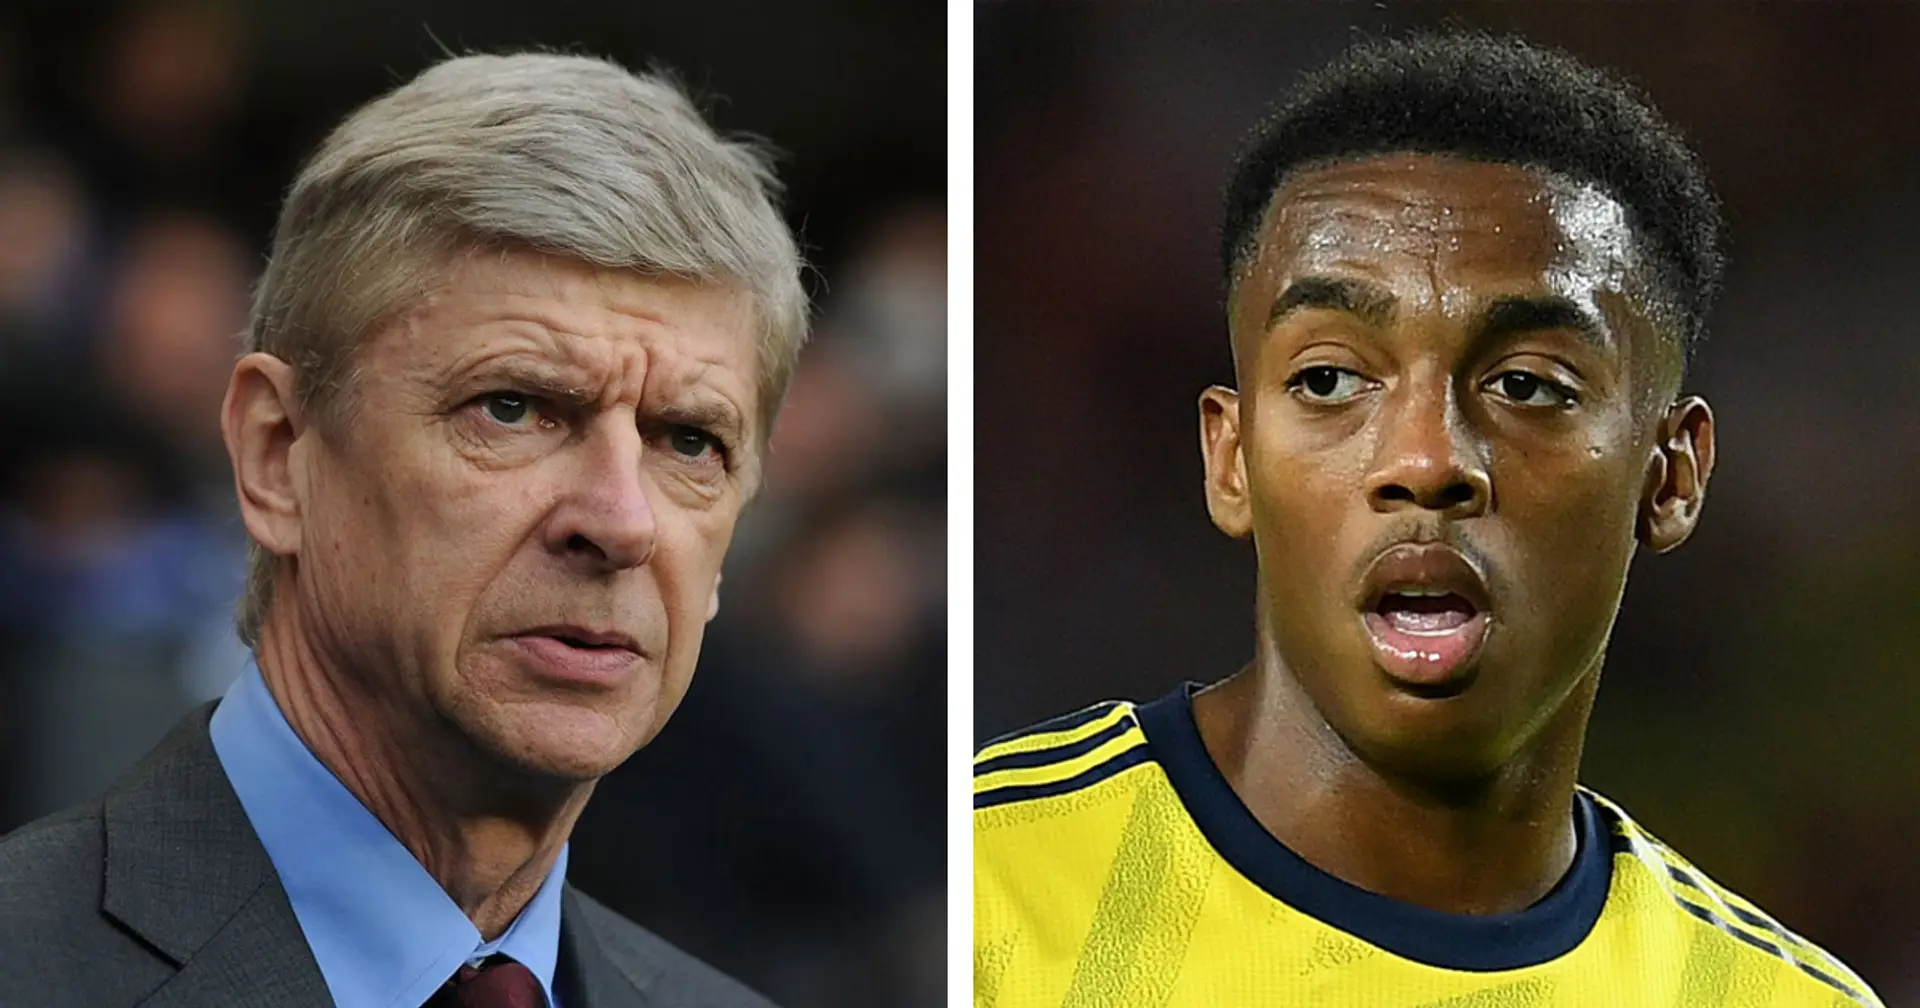 'Arsene Wenger was Arsenal. It was all I knew': Joe Willock on lessons learnt from the Frenchman